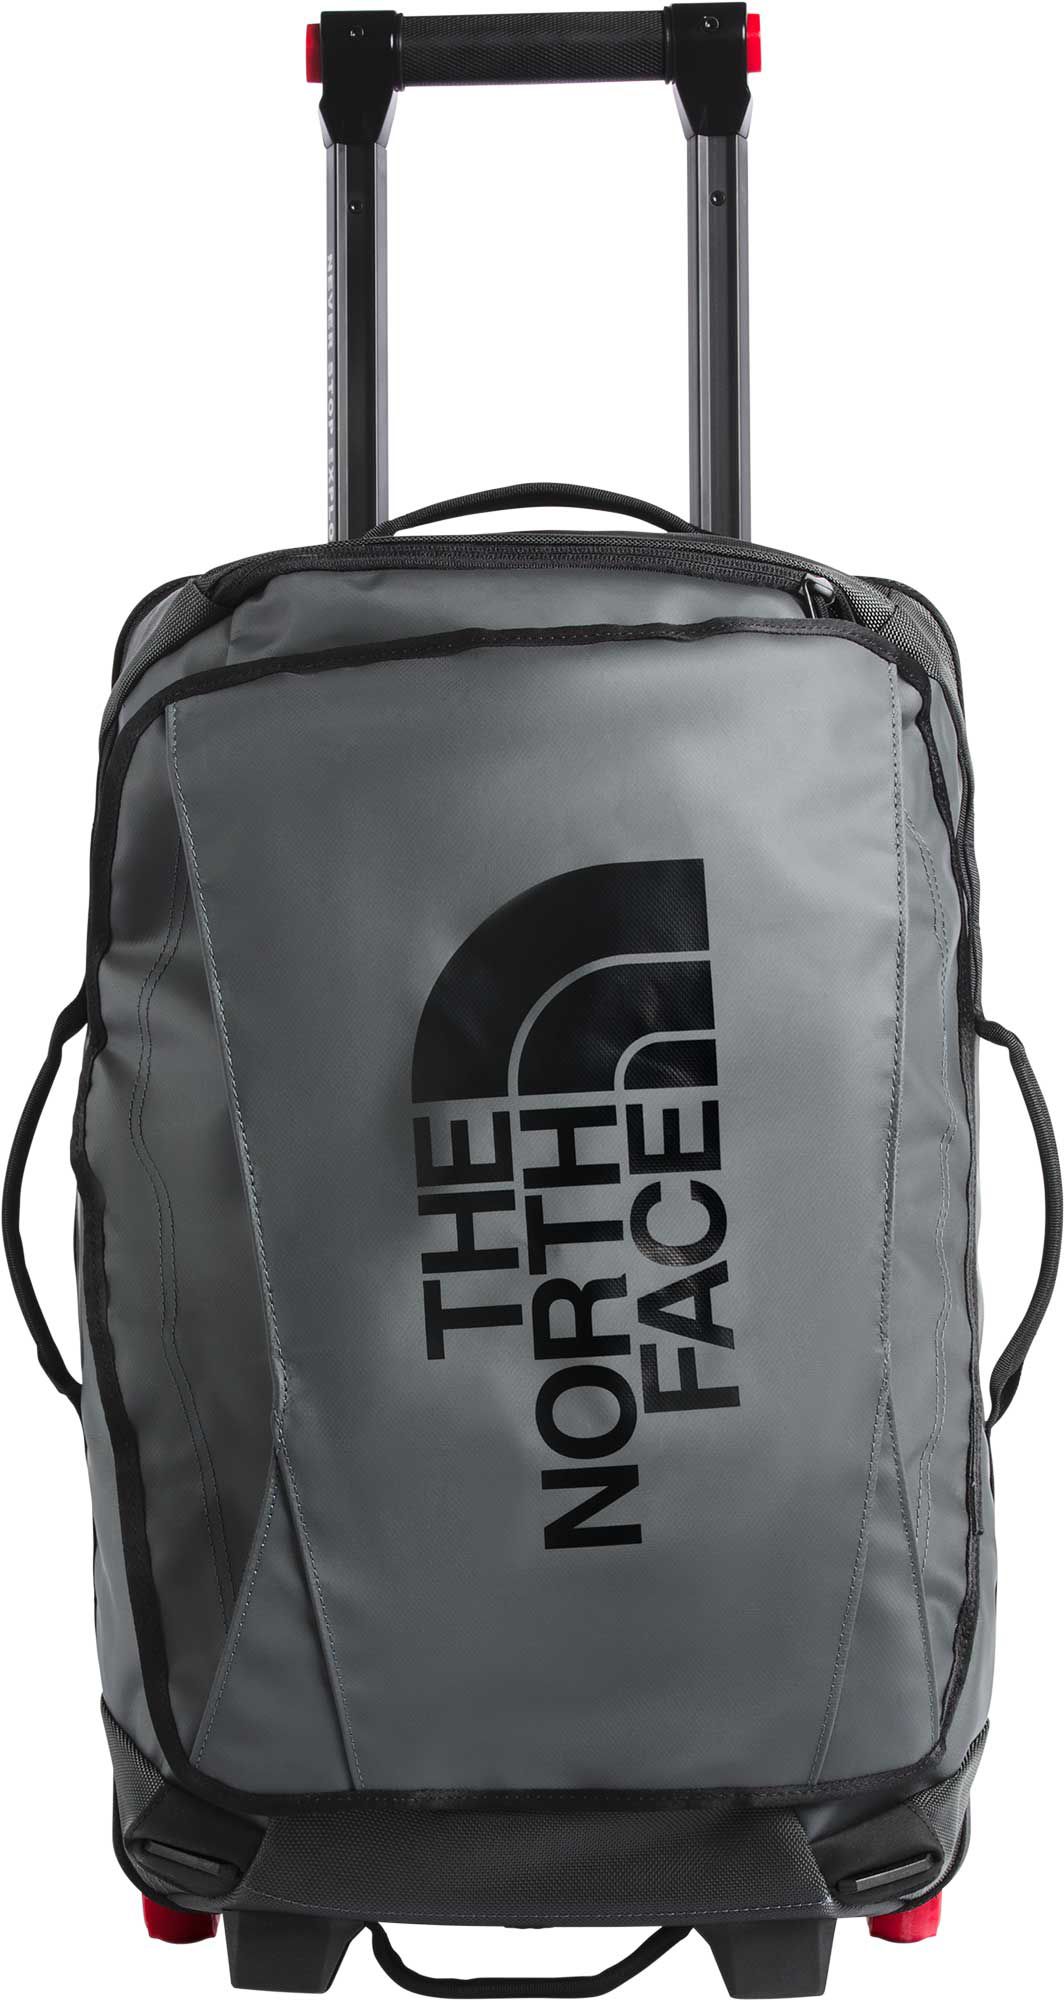 north face thunder roller